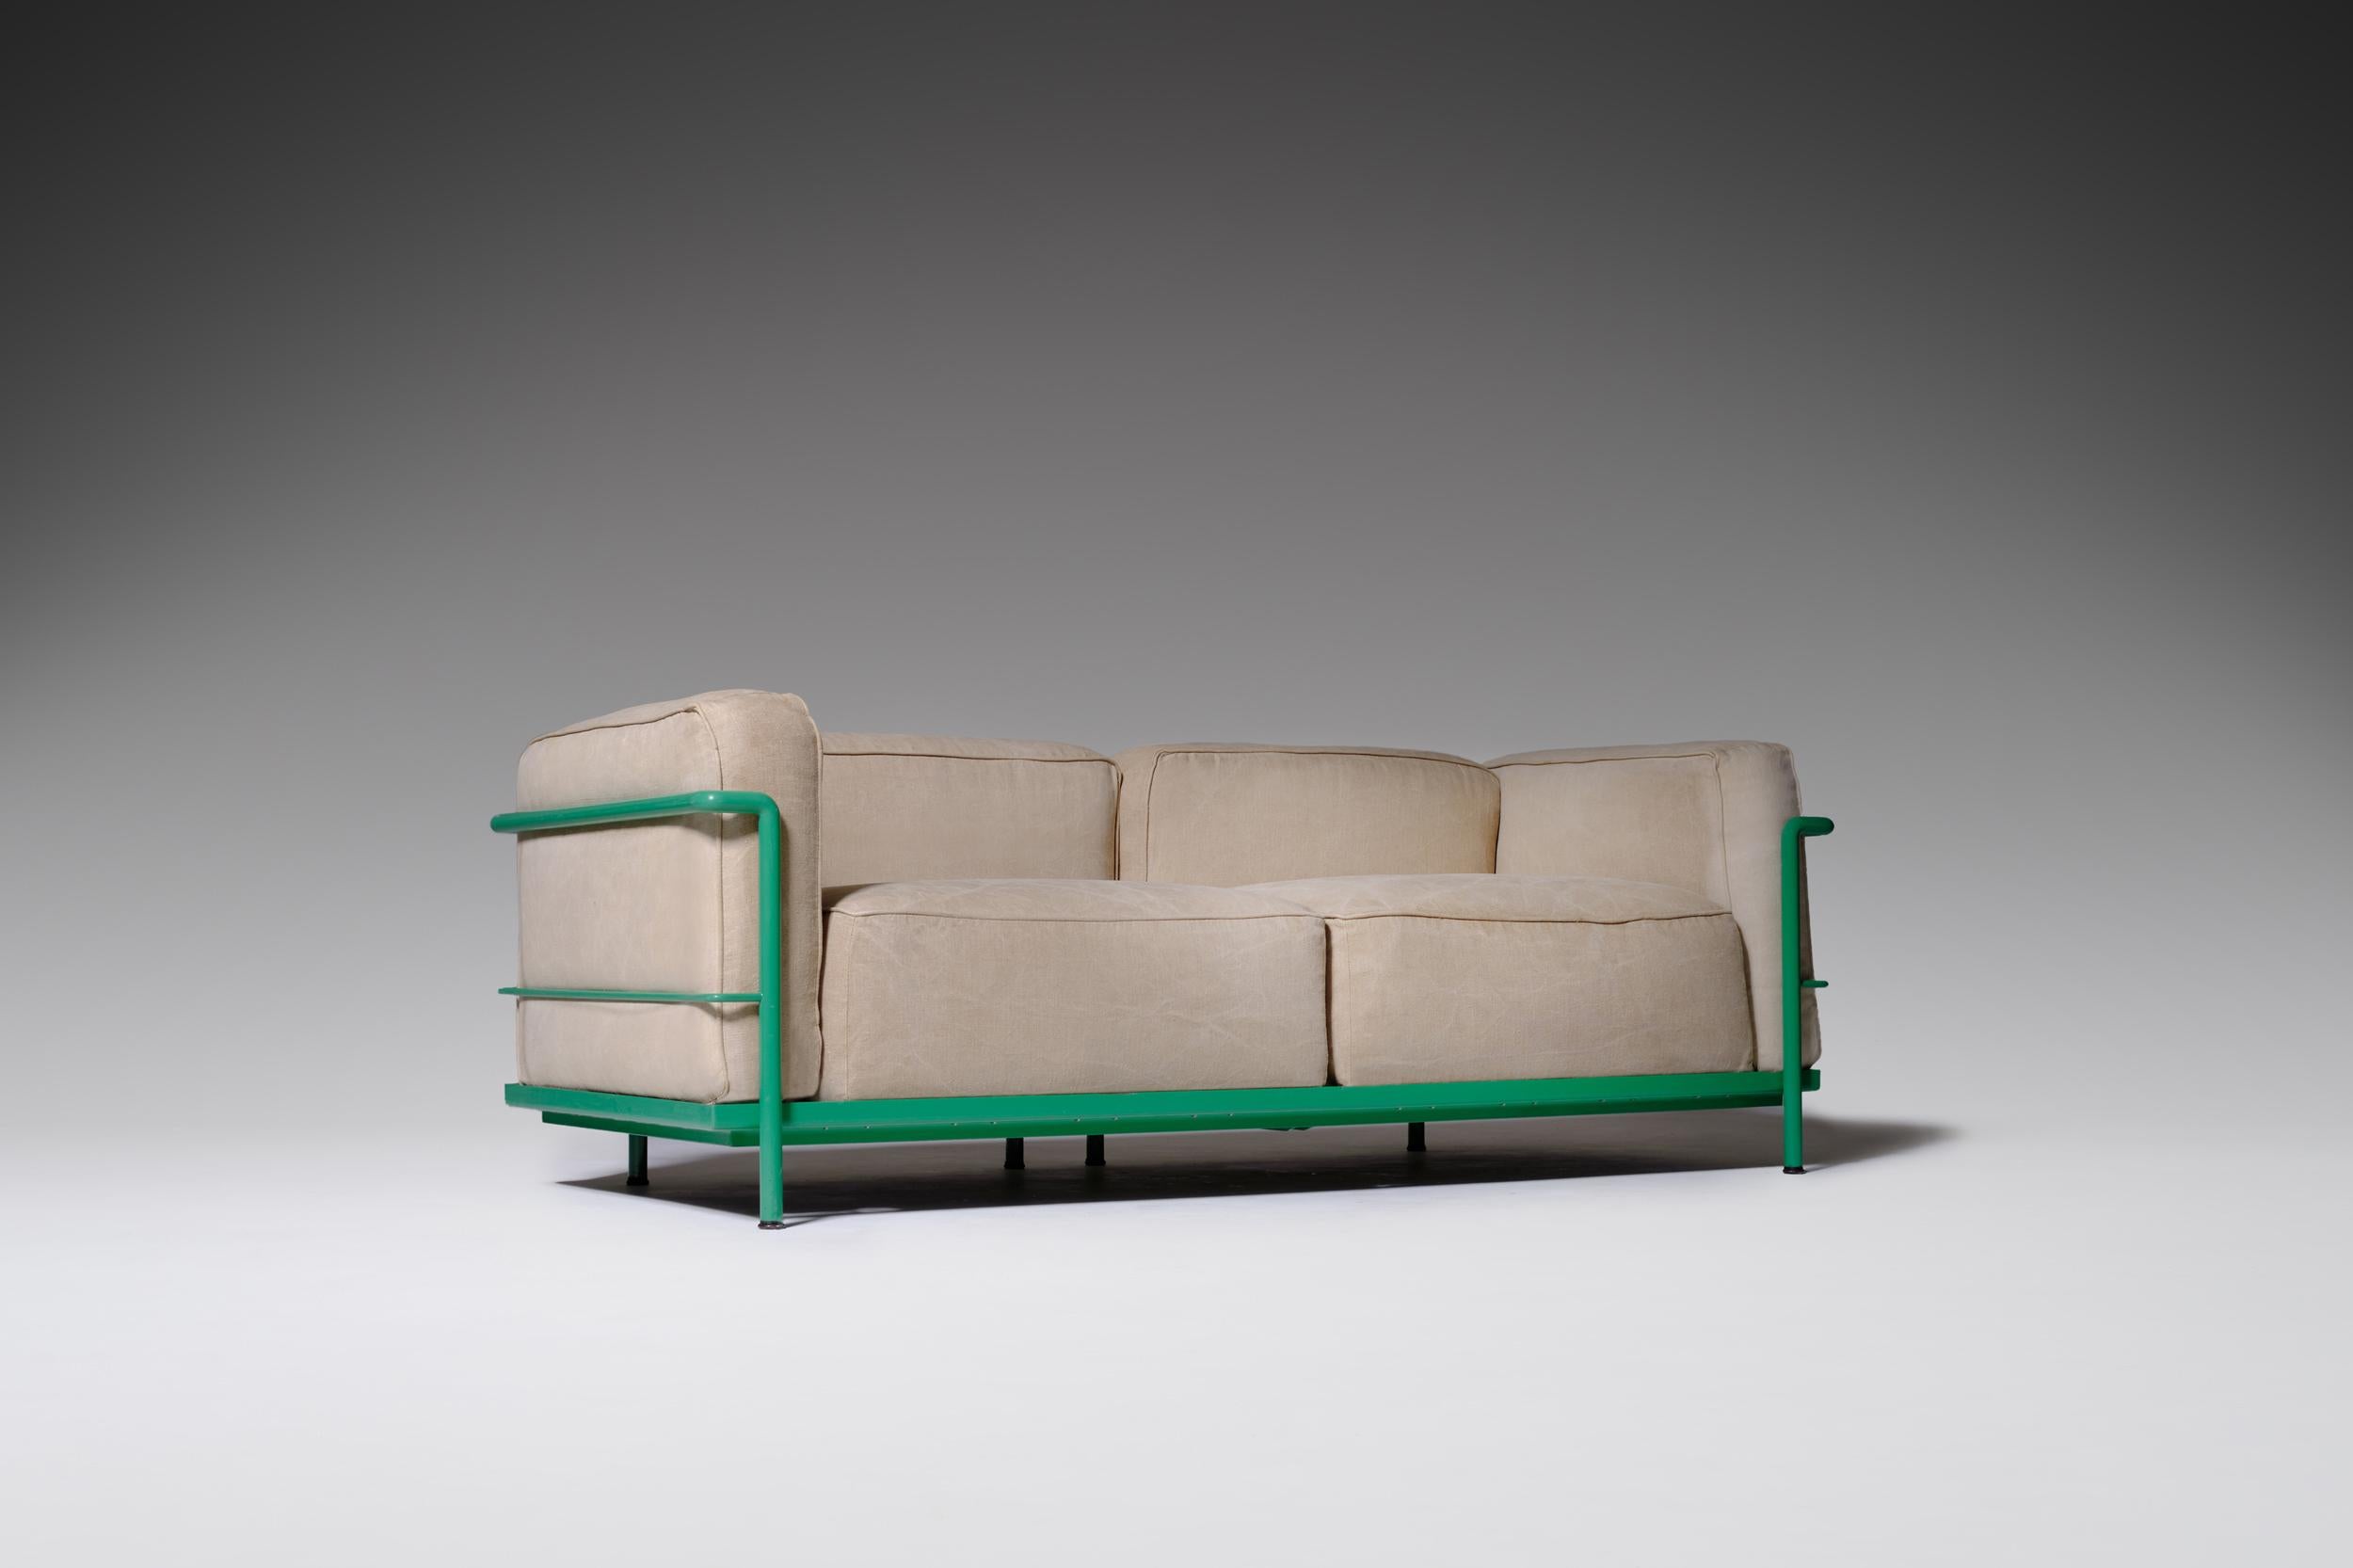 LC3 two-seat sofa by Le Corbusier, Charlotte Perriand and Pierre Jeanneret, originally designed in 1928. This particular one is produced by Cassina in 1965. Special edition constructed out of a bright green lacquered tubular steel frame and natural